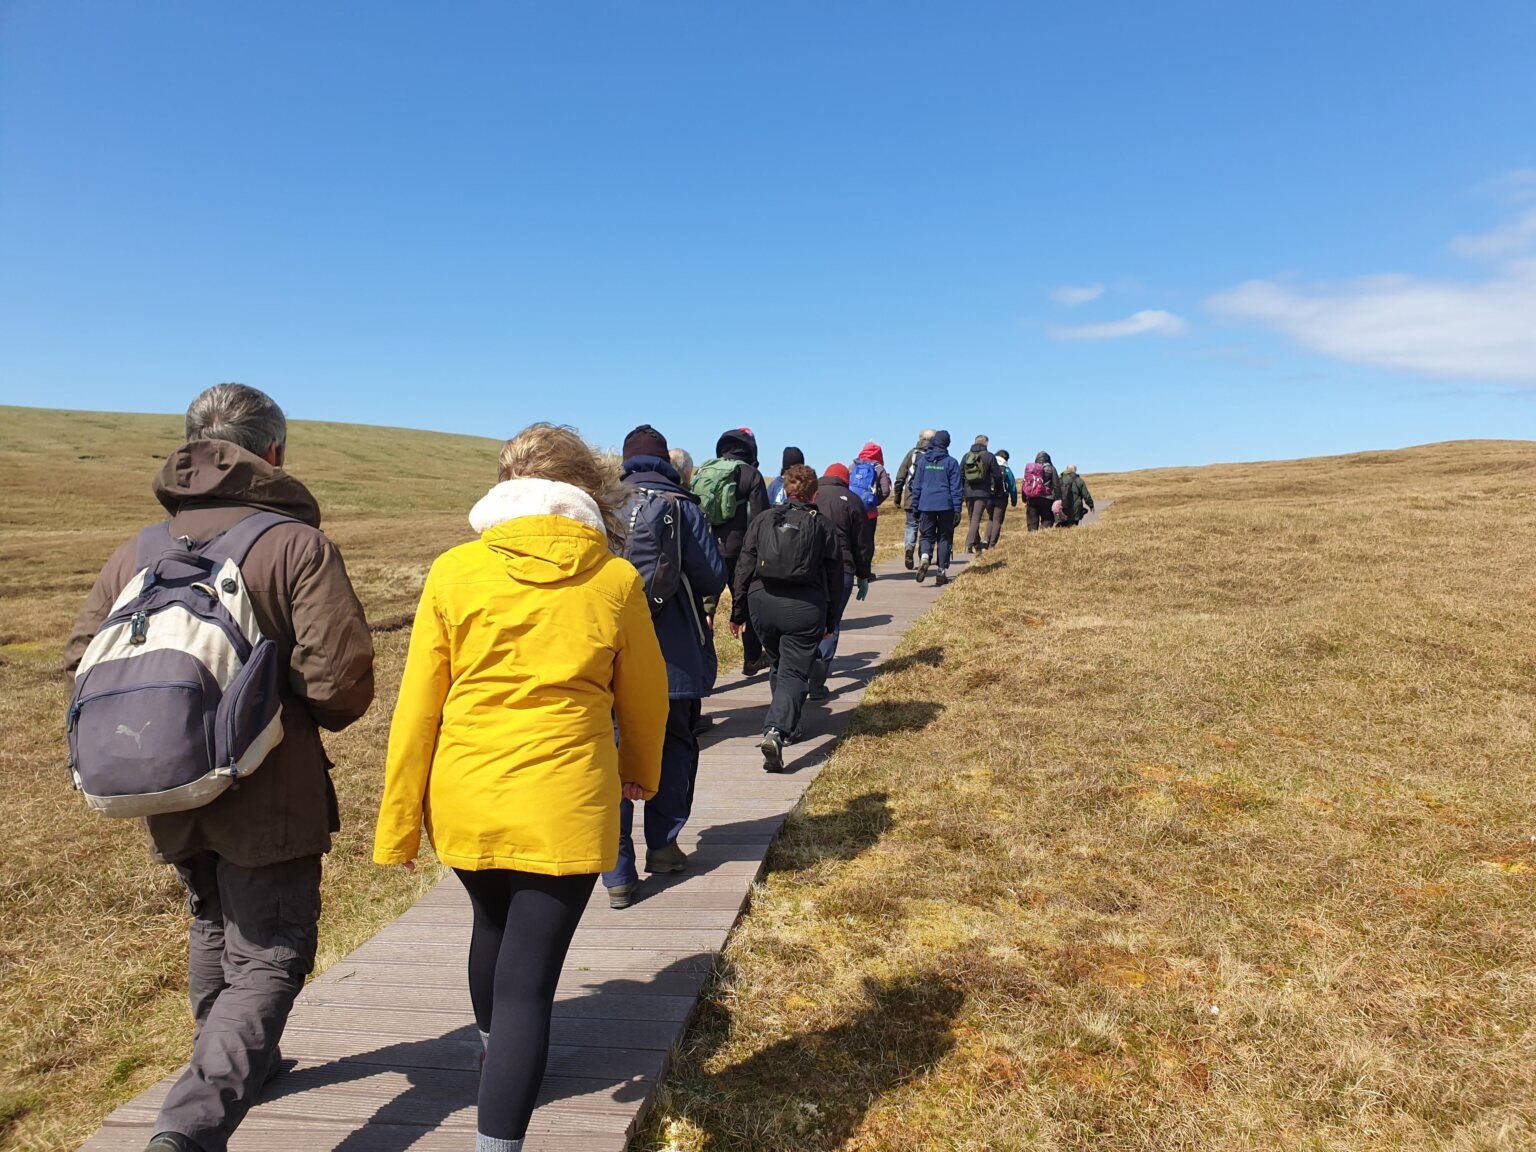 Record number of visitors to Hermaness | The Shetland Times Ltd